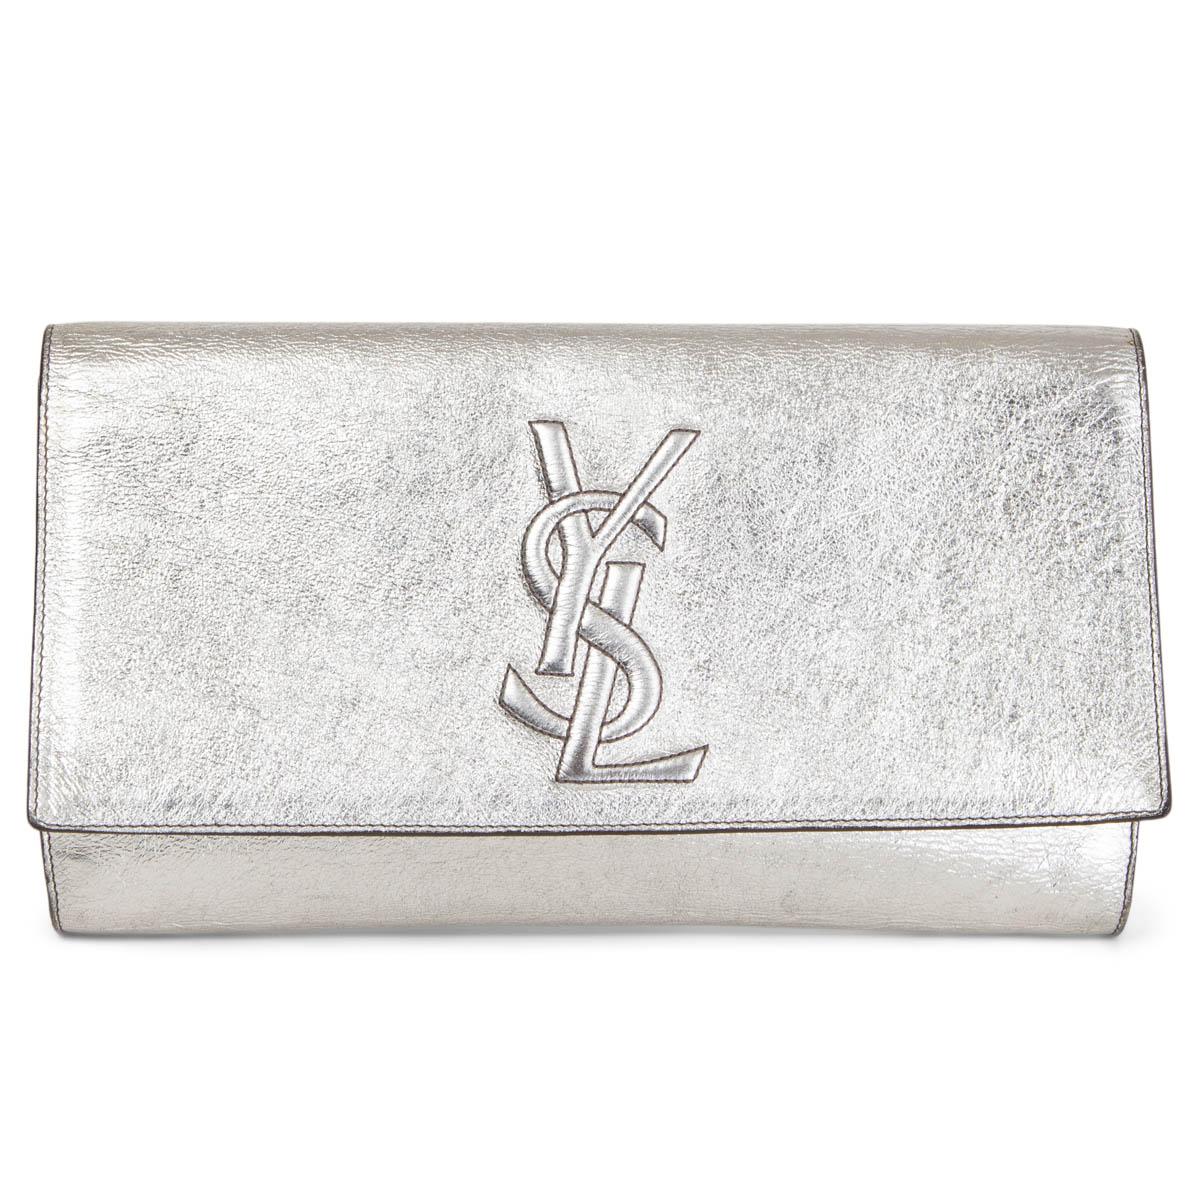 100% authentic Yves Saint Laurent 'Belle de Jour Large' clutch in metallic silver-tone calfskin featuring YSL logo stitching at front. Open with a magnetic button under the flap and is lined in black satin. Has been carried and is in excellent